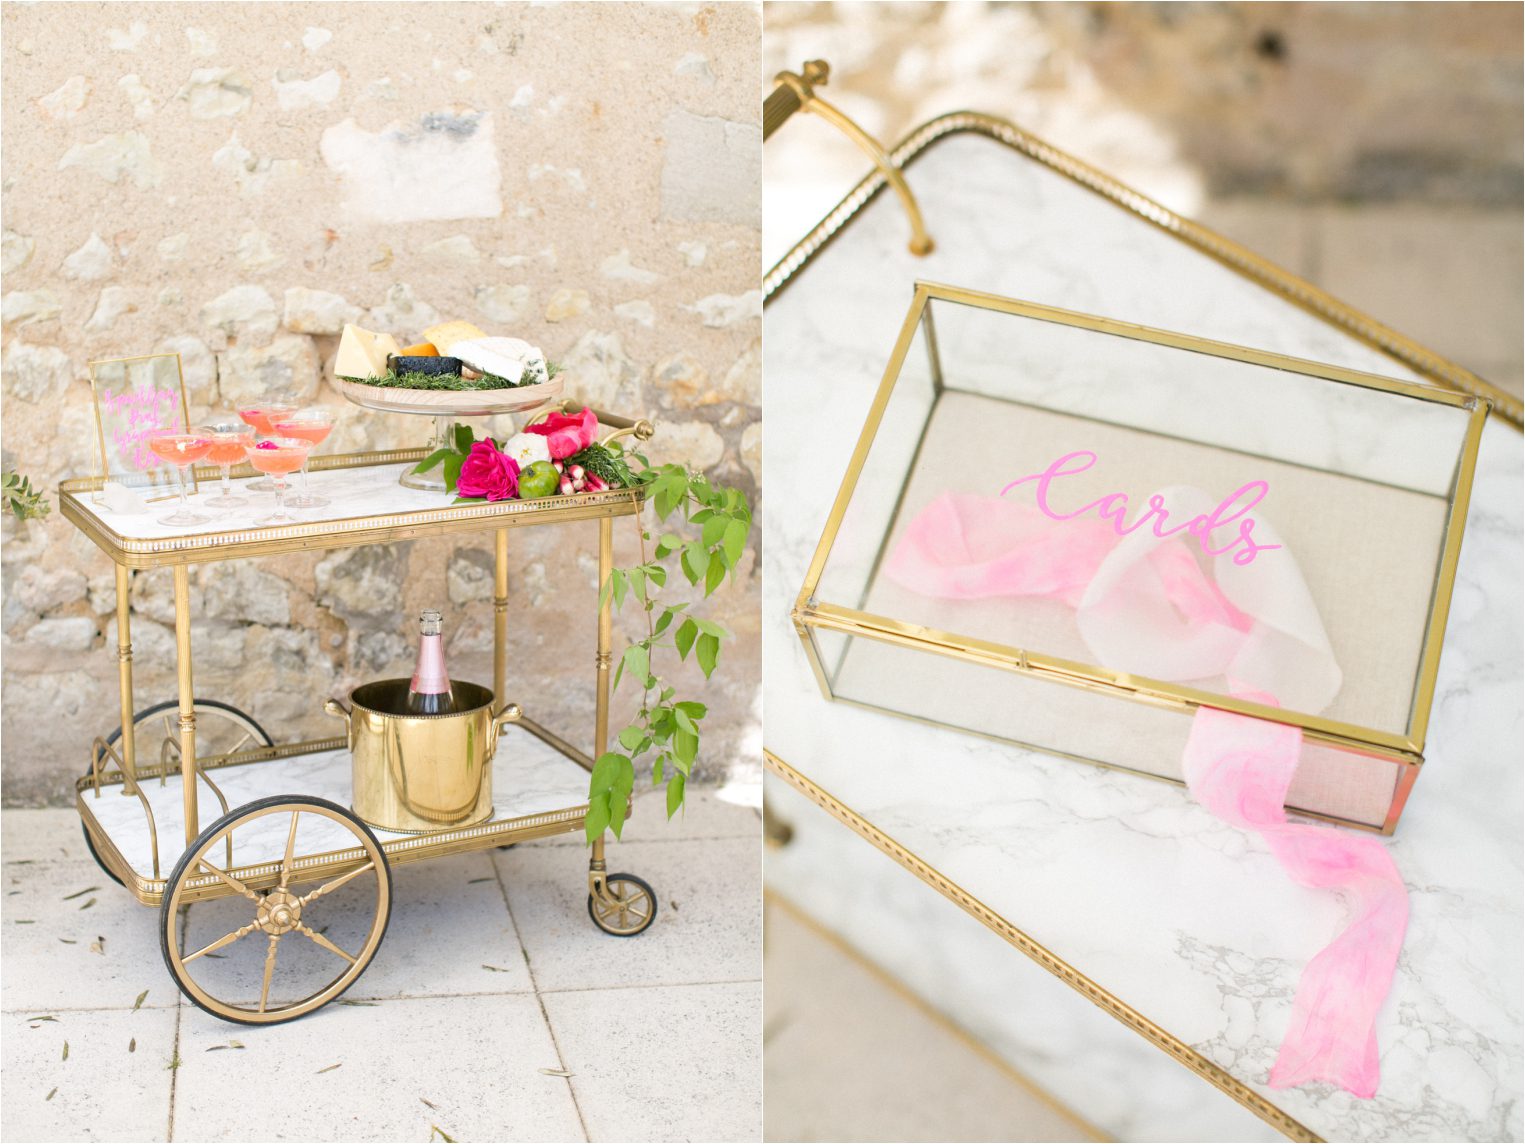 Vintage Fromagerie trolley for an intimate wedding in France